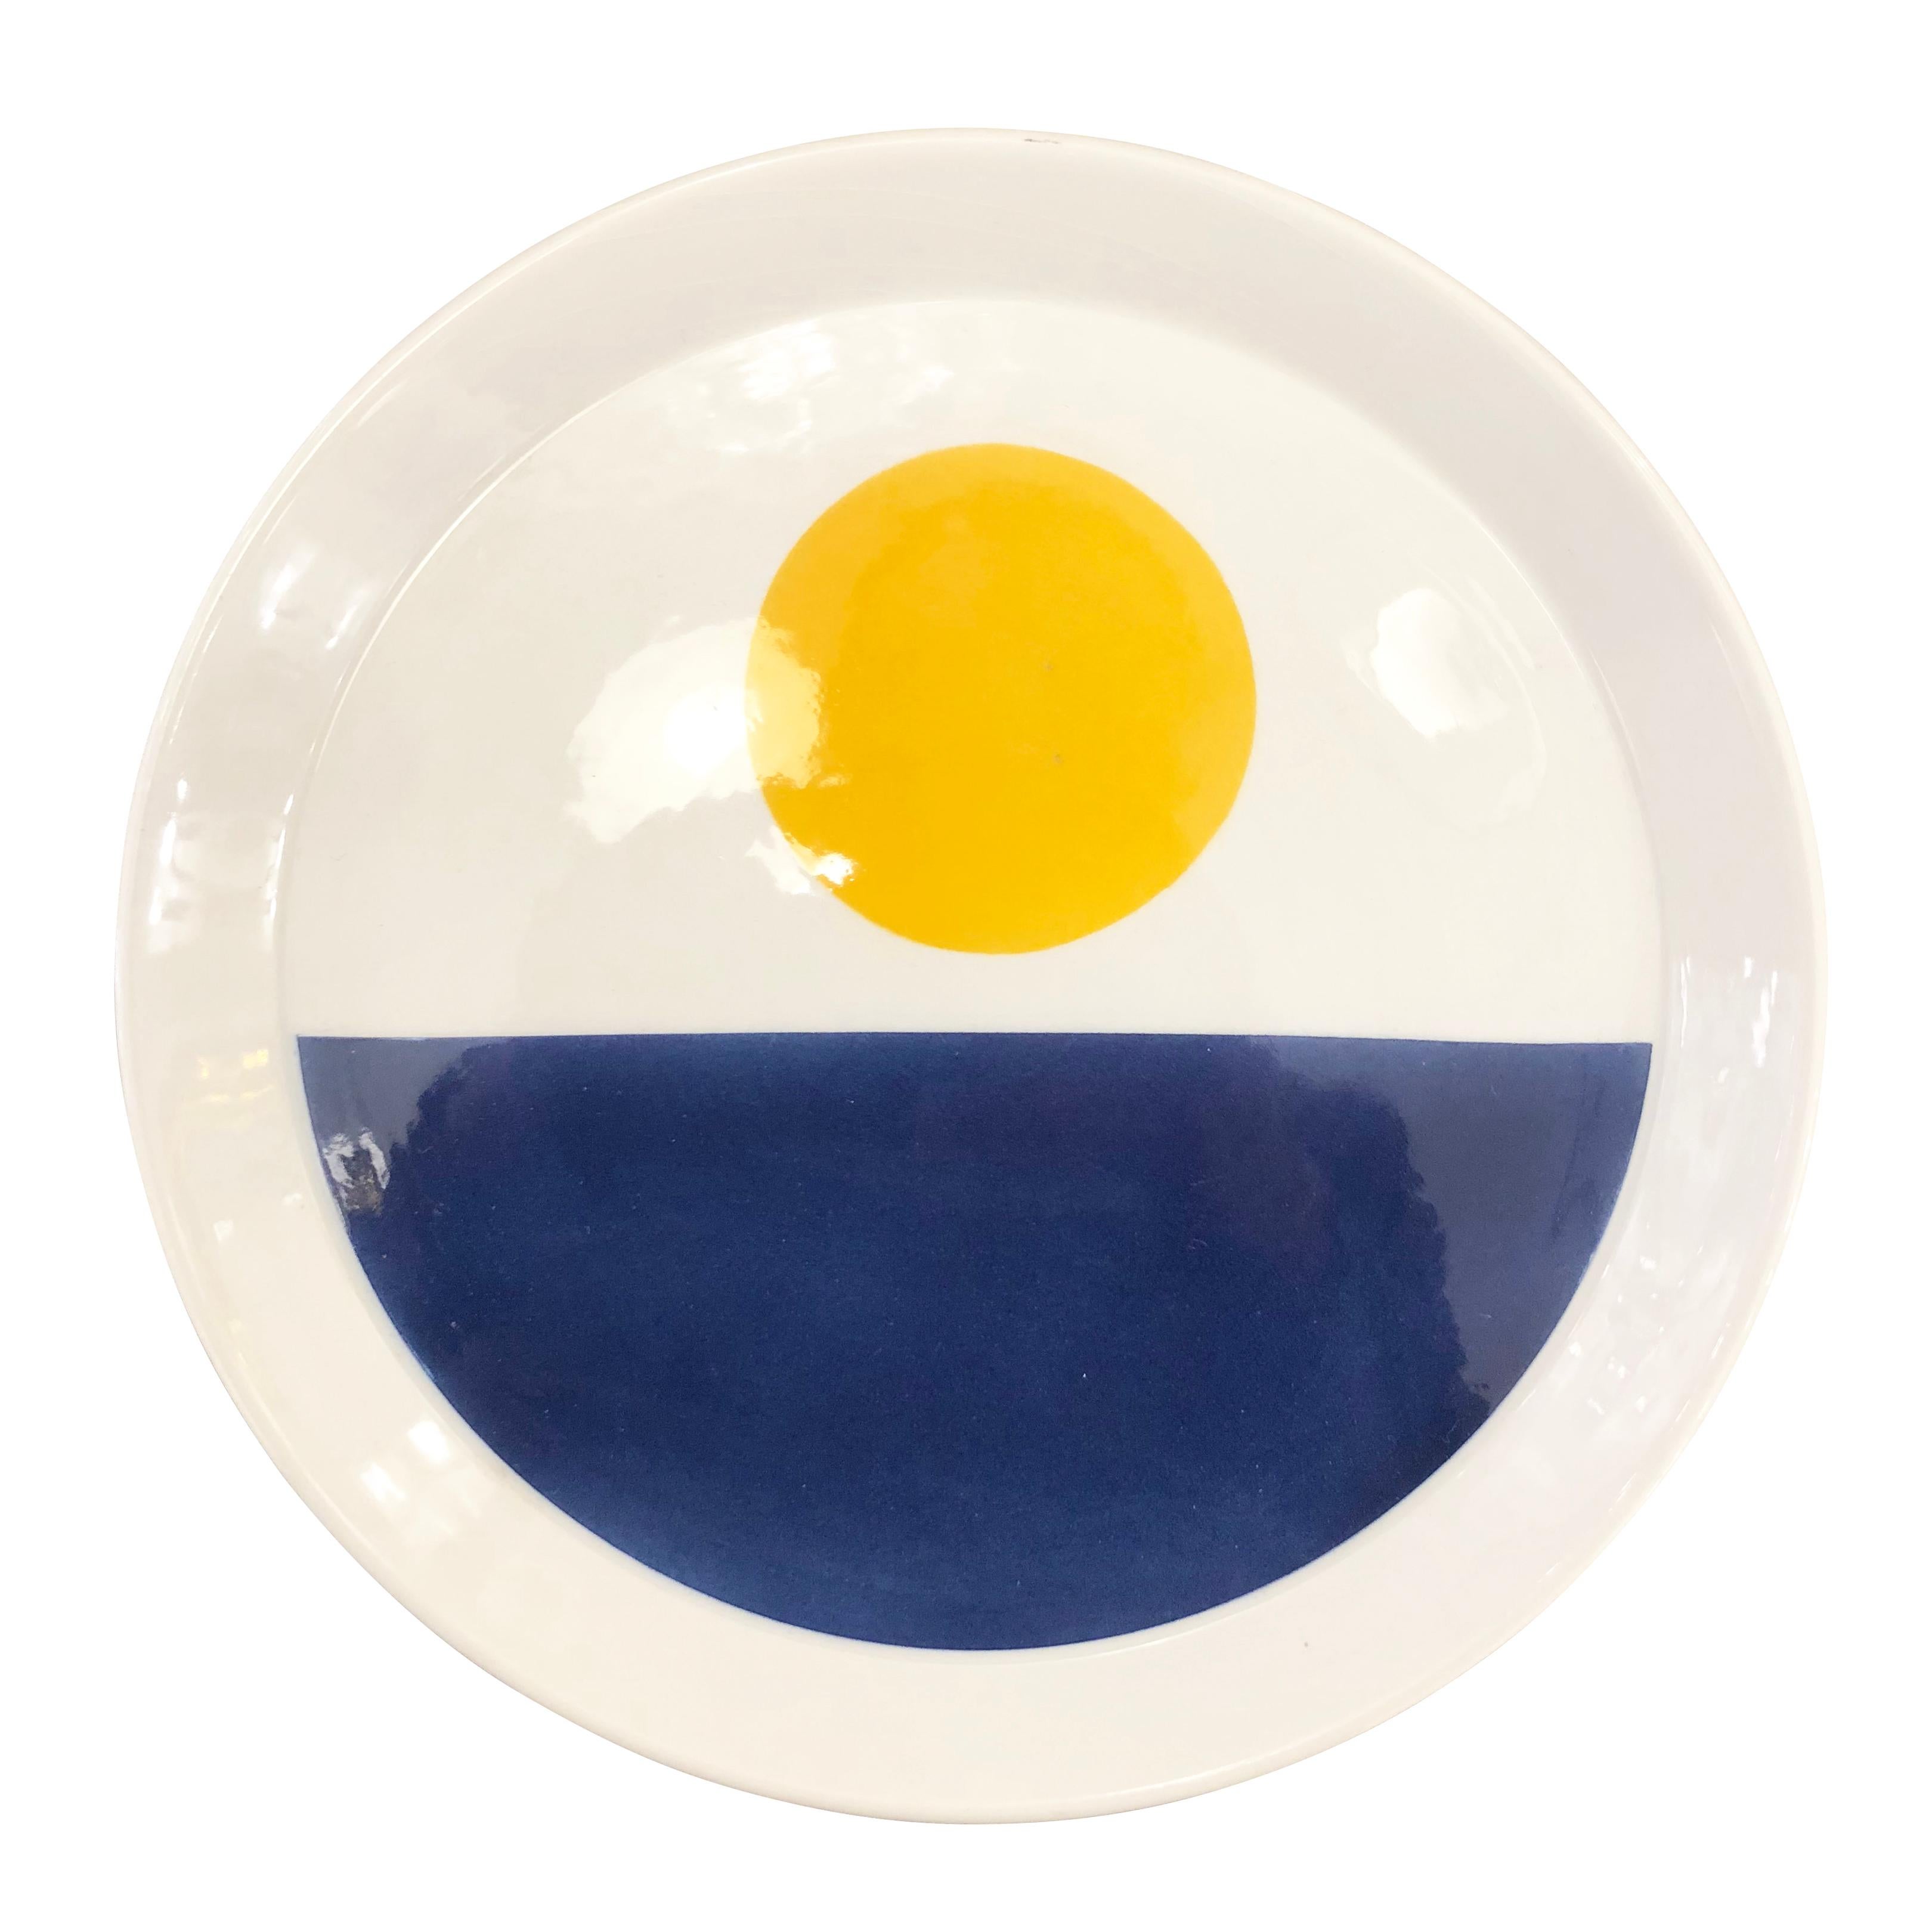 Decorative plate designed by Gio Ponti for Ceramiche Franco Pozzi as part of his “Fantasia Italiana” series. Signed on the back.

Condition: Excellent vintage condition, minor wear consistent with age and use

Measures: Diameter 14.75”

Depth